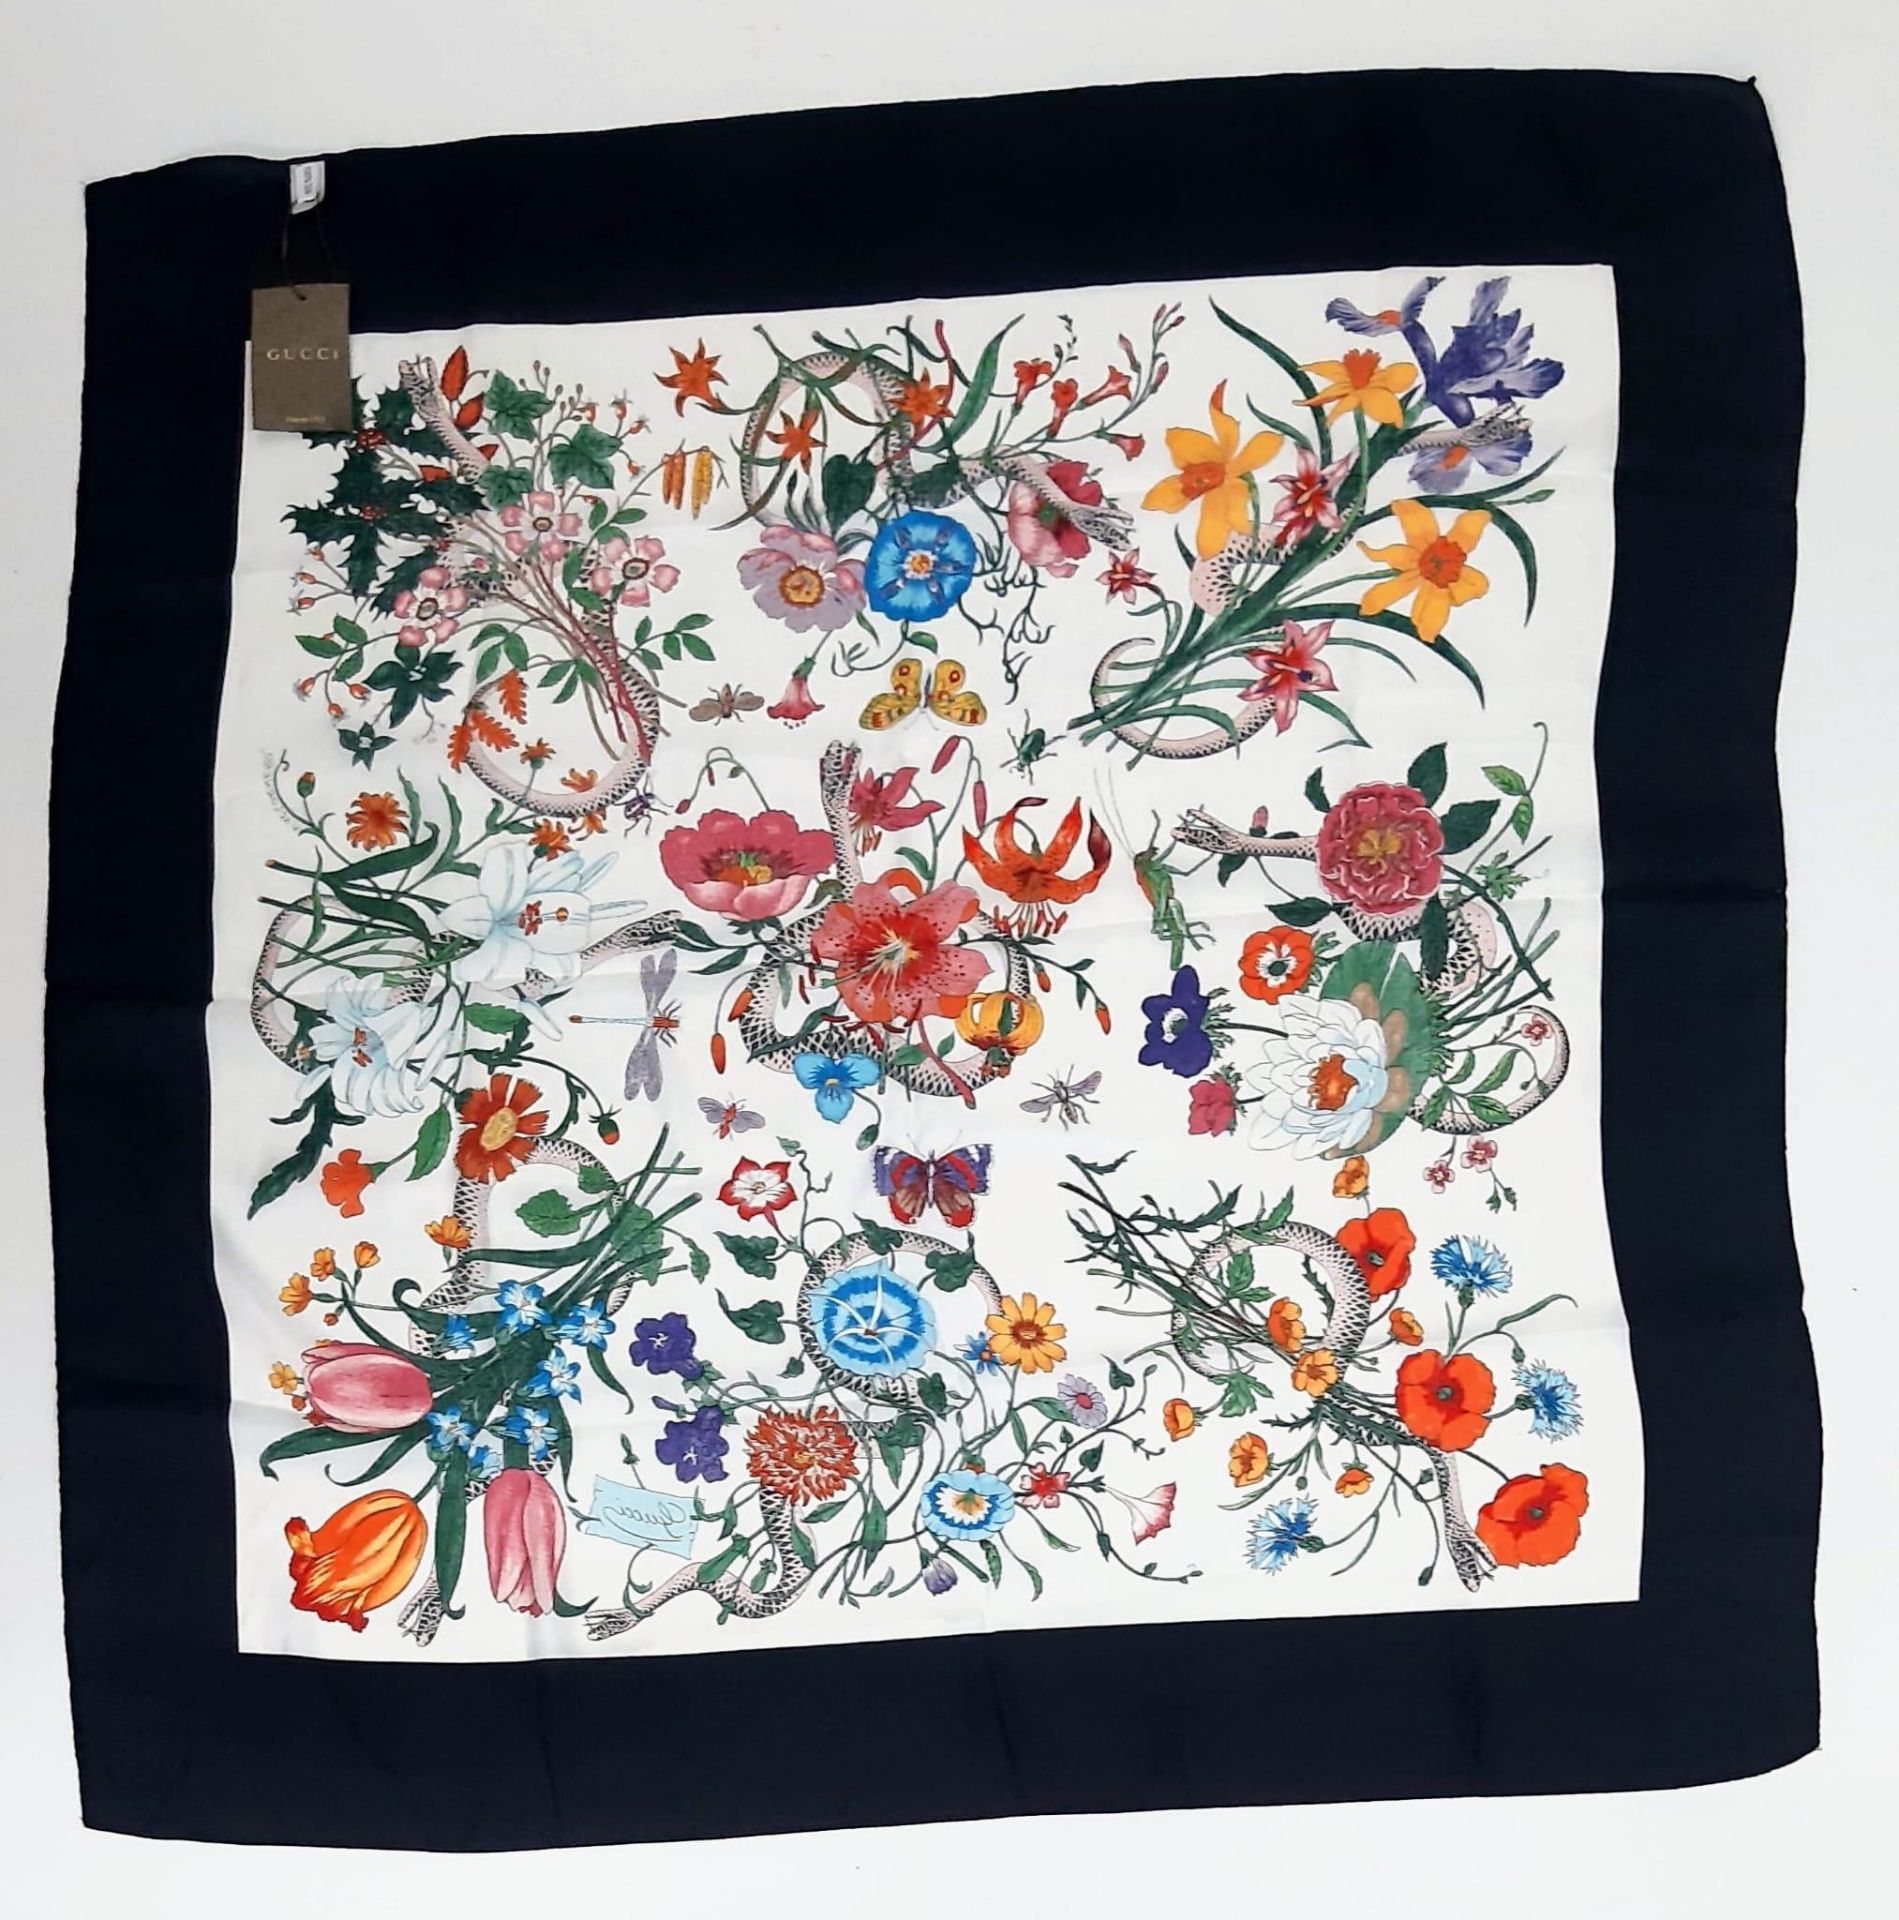 Gucci Silk Scarf. Features a wonderful floral & creatures pattern with a bold black border. Measures